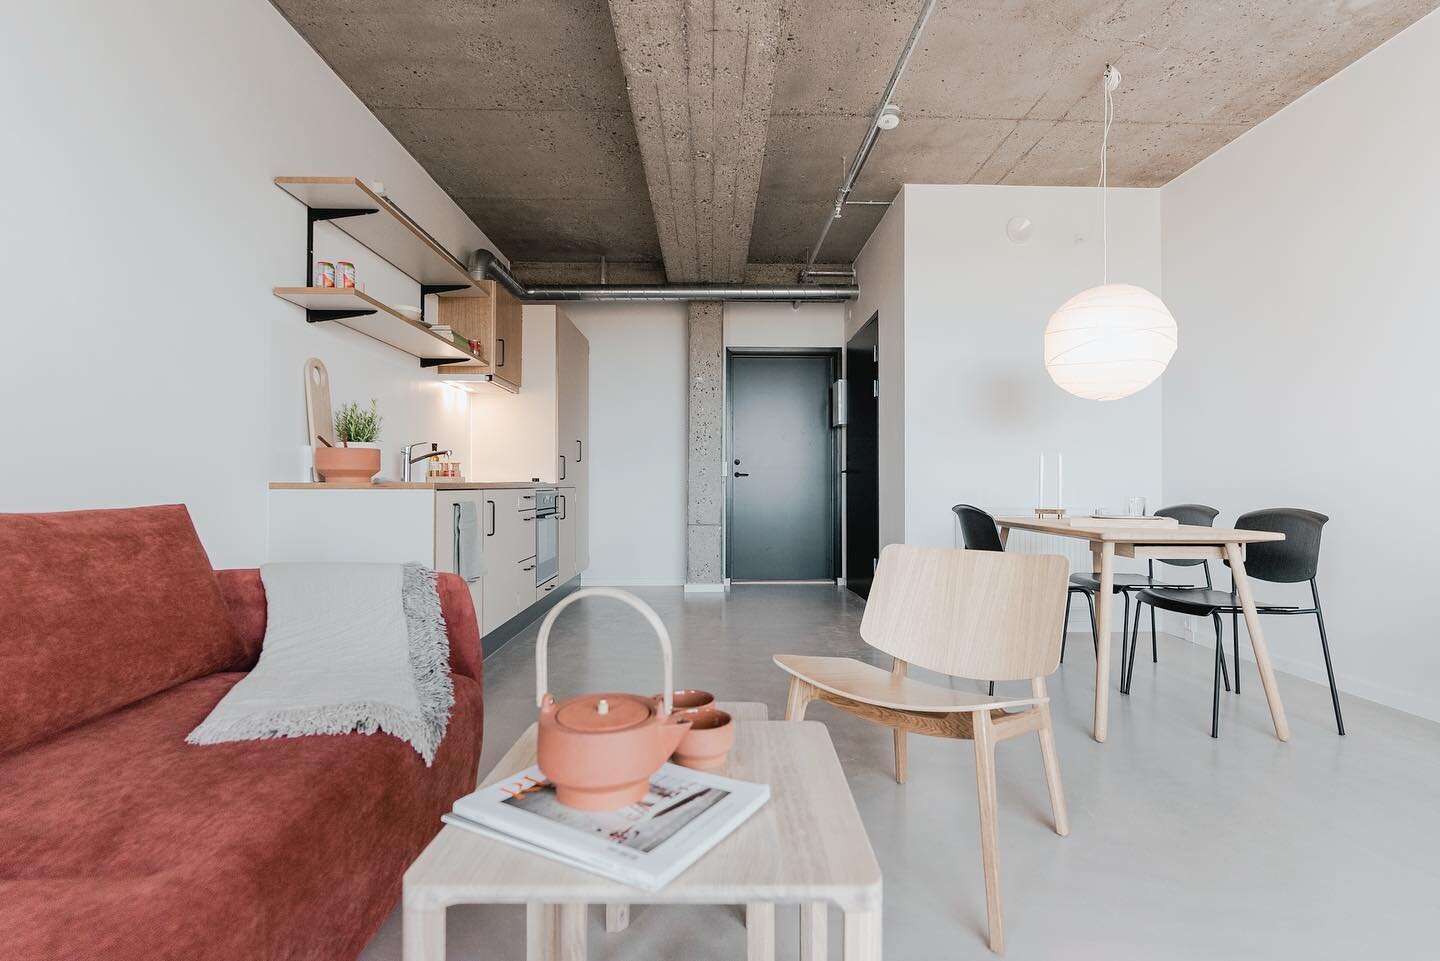 Are you looking for a new workspace or a place to live? Maybe even a combination of the two? Then Siljangade is exactly what you are looking for!
.
.
.
#siljangade #coworking #coliving #work #workcommunity #coworkingspace #colivingspace #entrepreneur